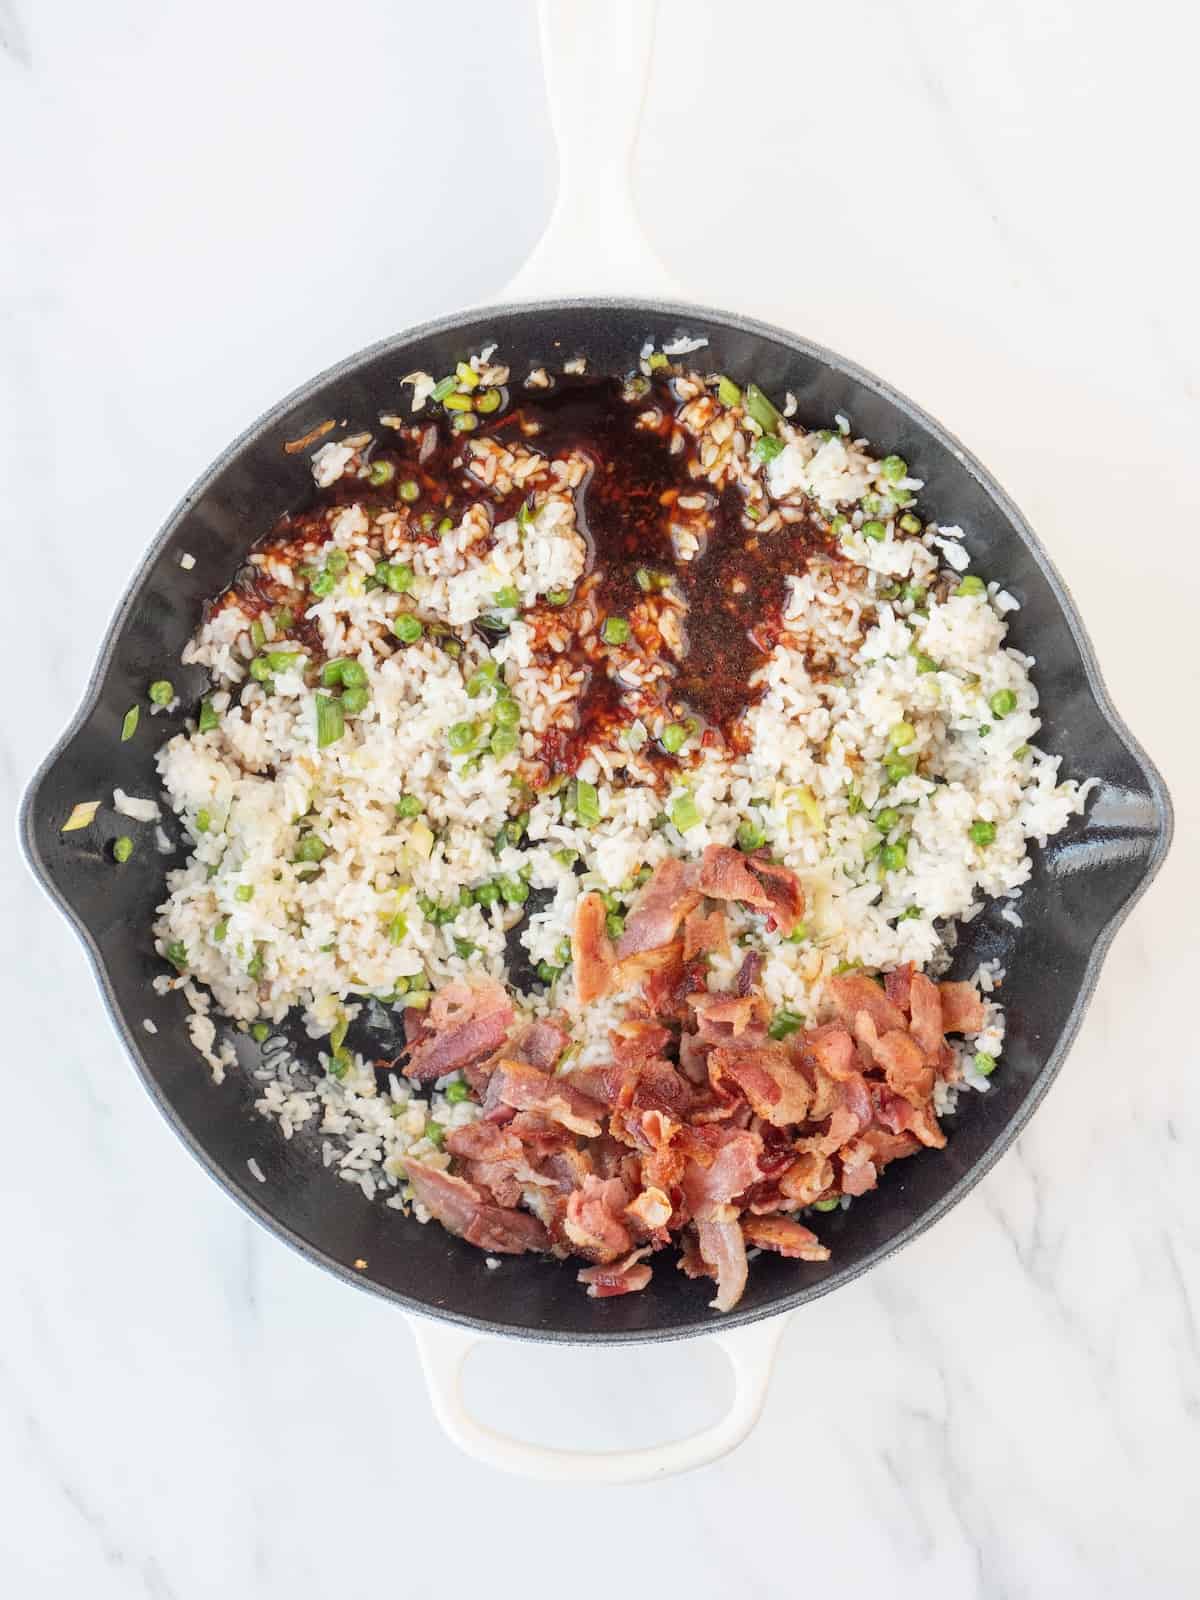 A skillet with rice being sautéed, and bacon bits and soy sauce-sambal mix just added.